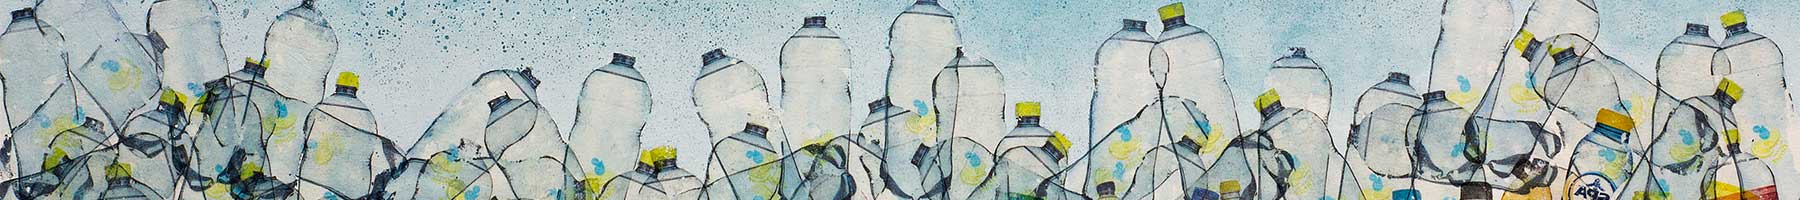 artwork of water with bottles in it